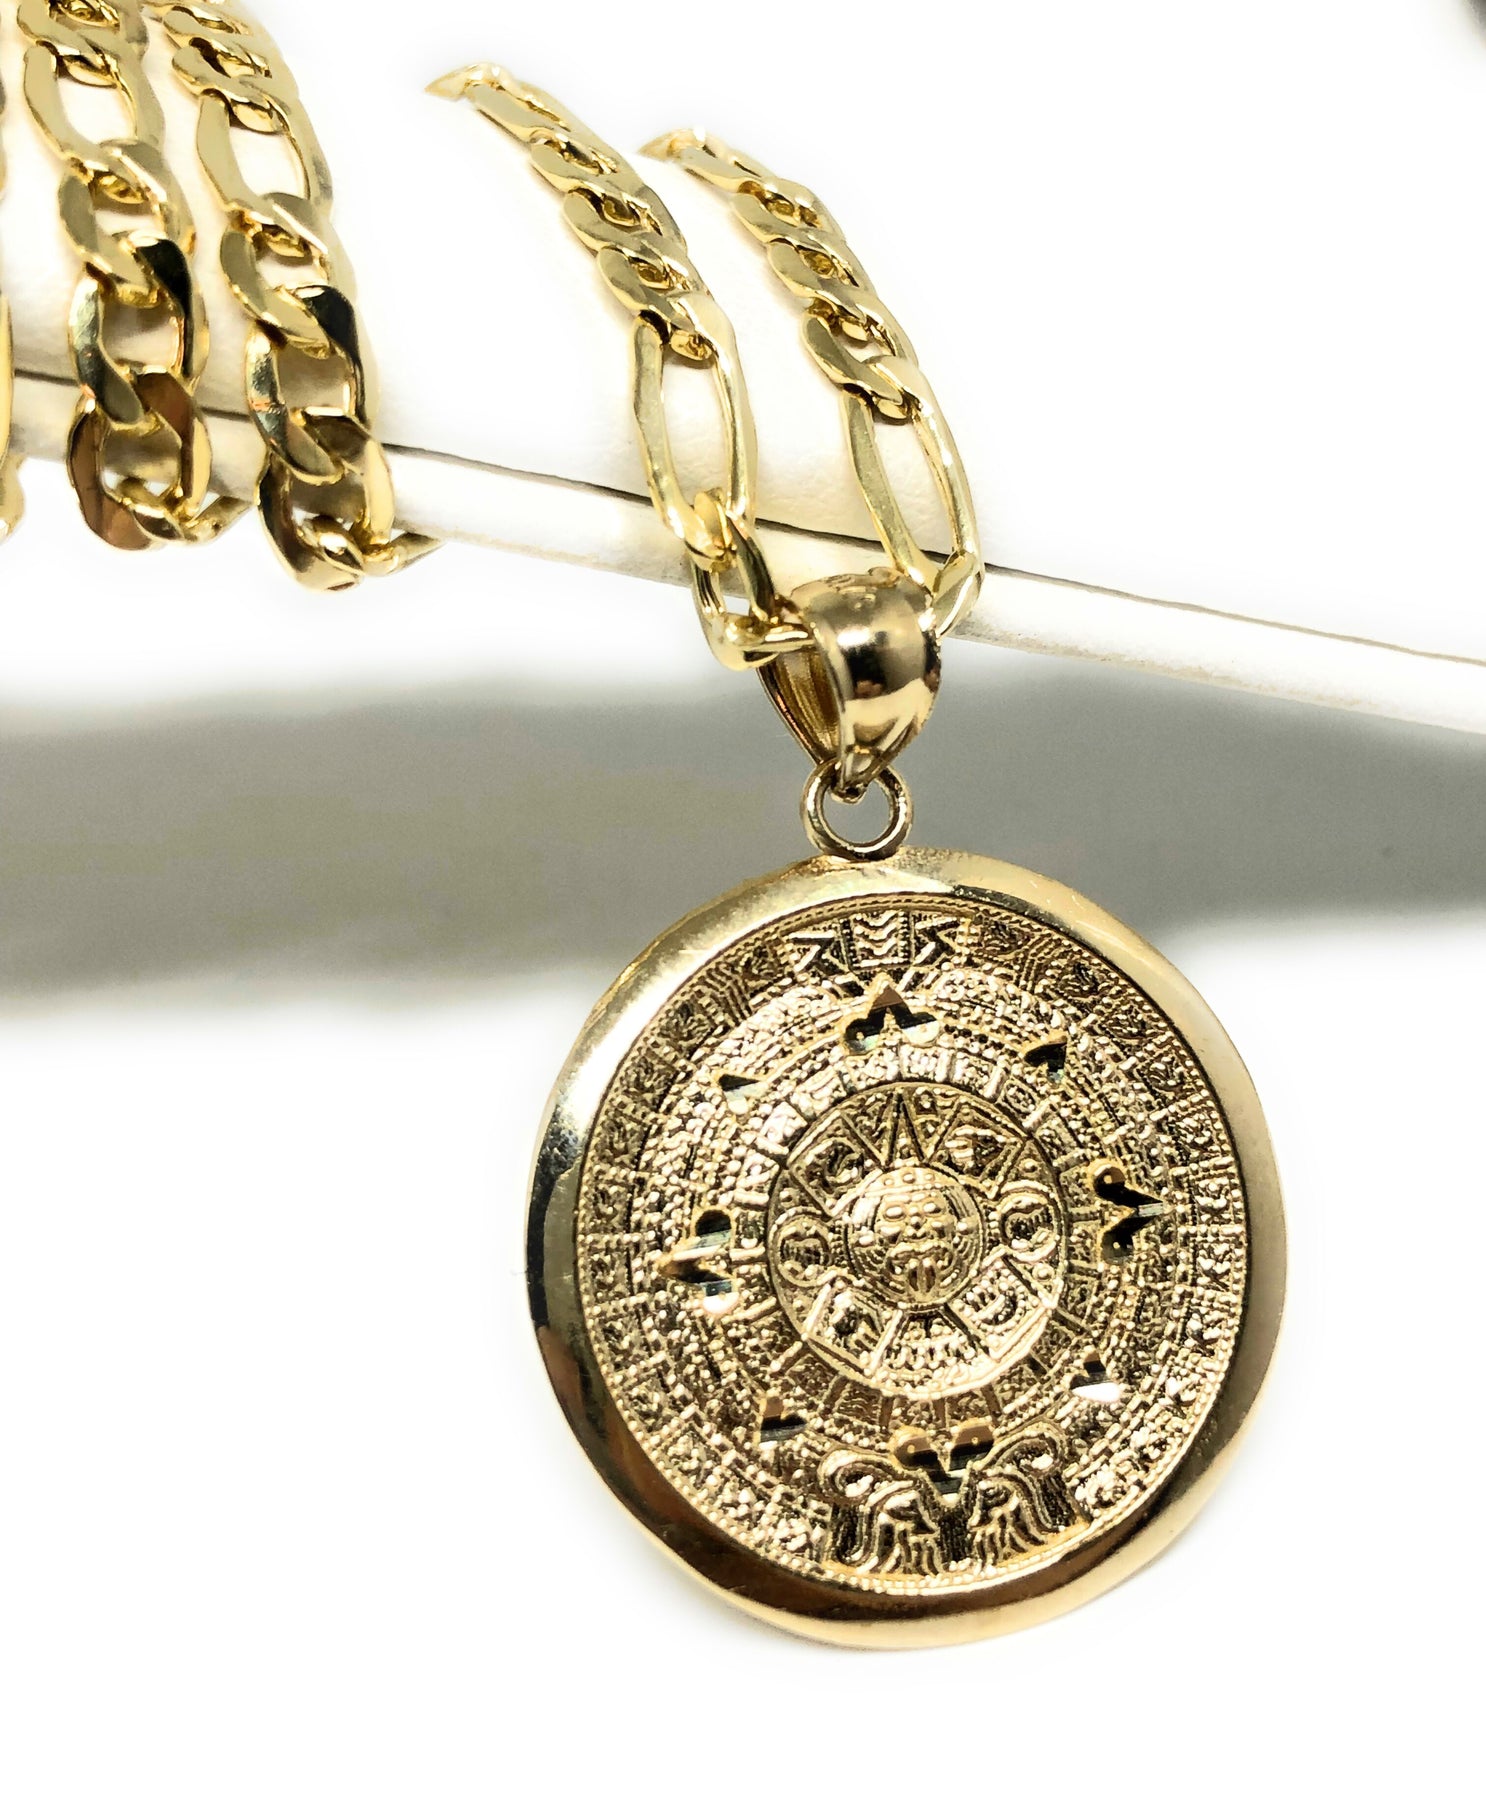 Buy Centenario Necklace 24K Gold Filled Mexican Coin 50 Pesos Online in  India - Etsy